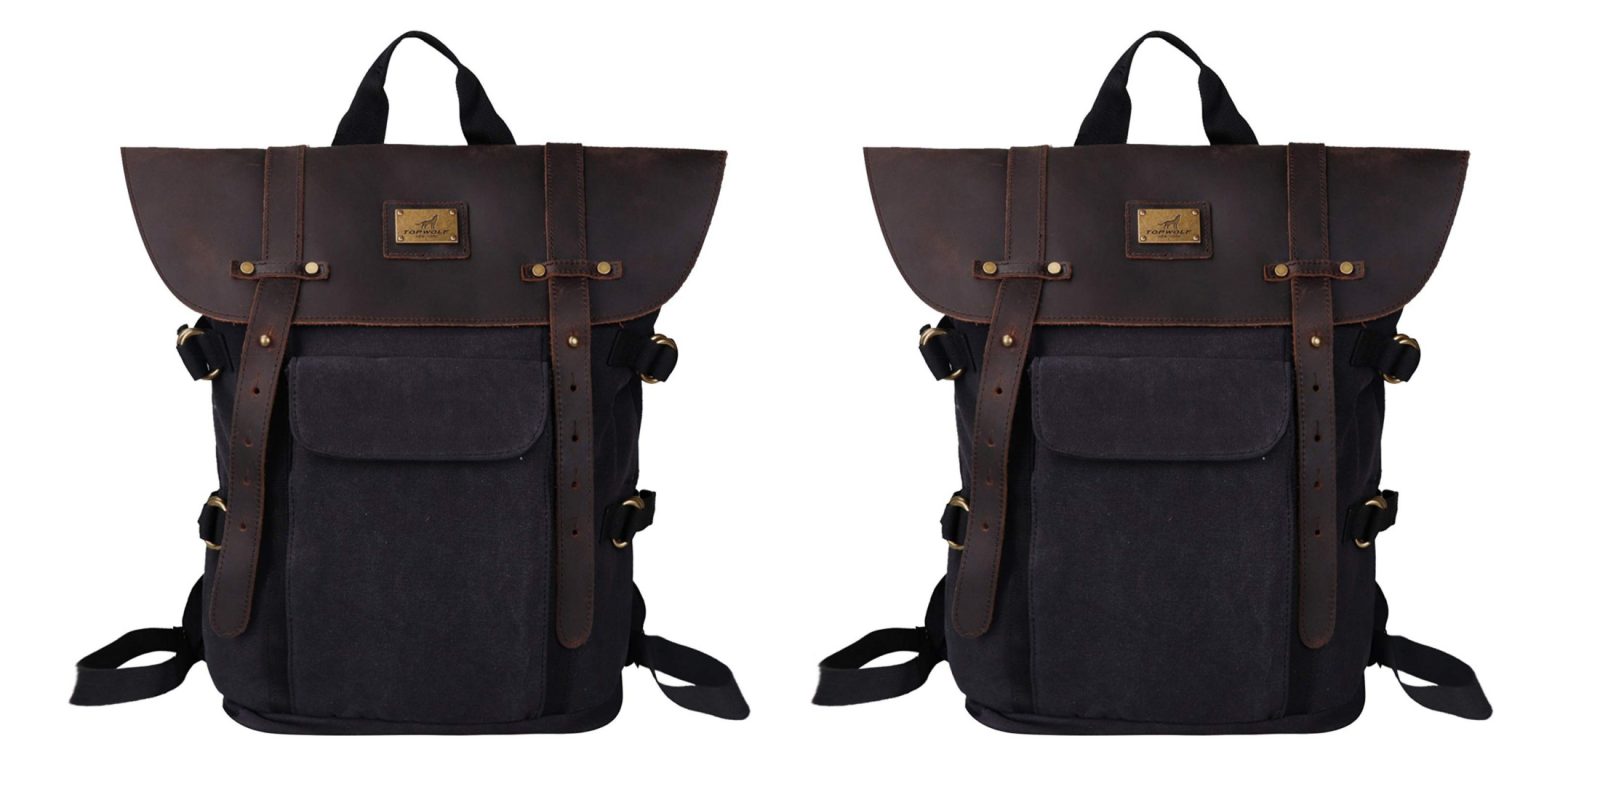 Vintage-style Leather & Canvas Backpack for 15&quot; MacBooks at $35 (Reg. $70) - 9to5Toys